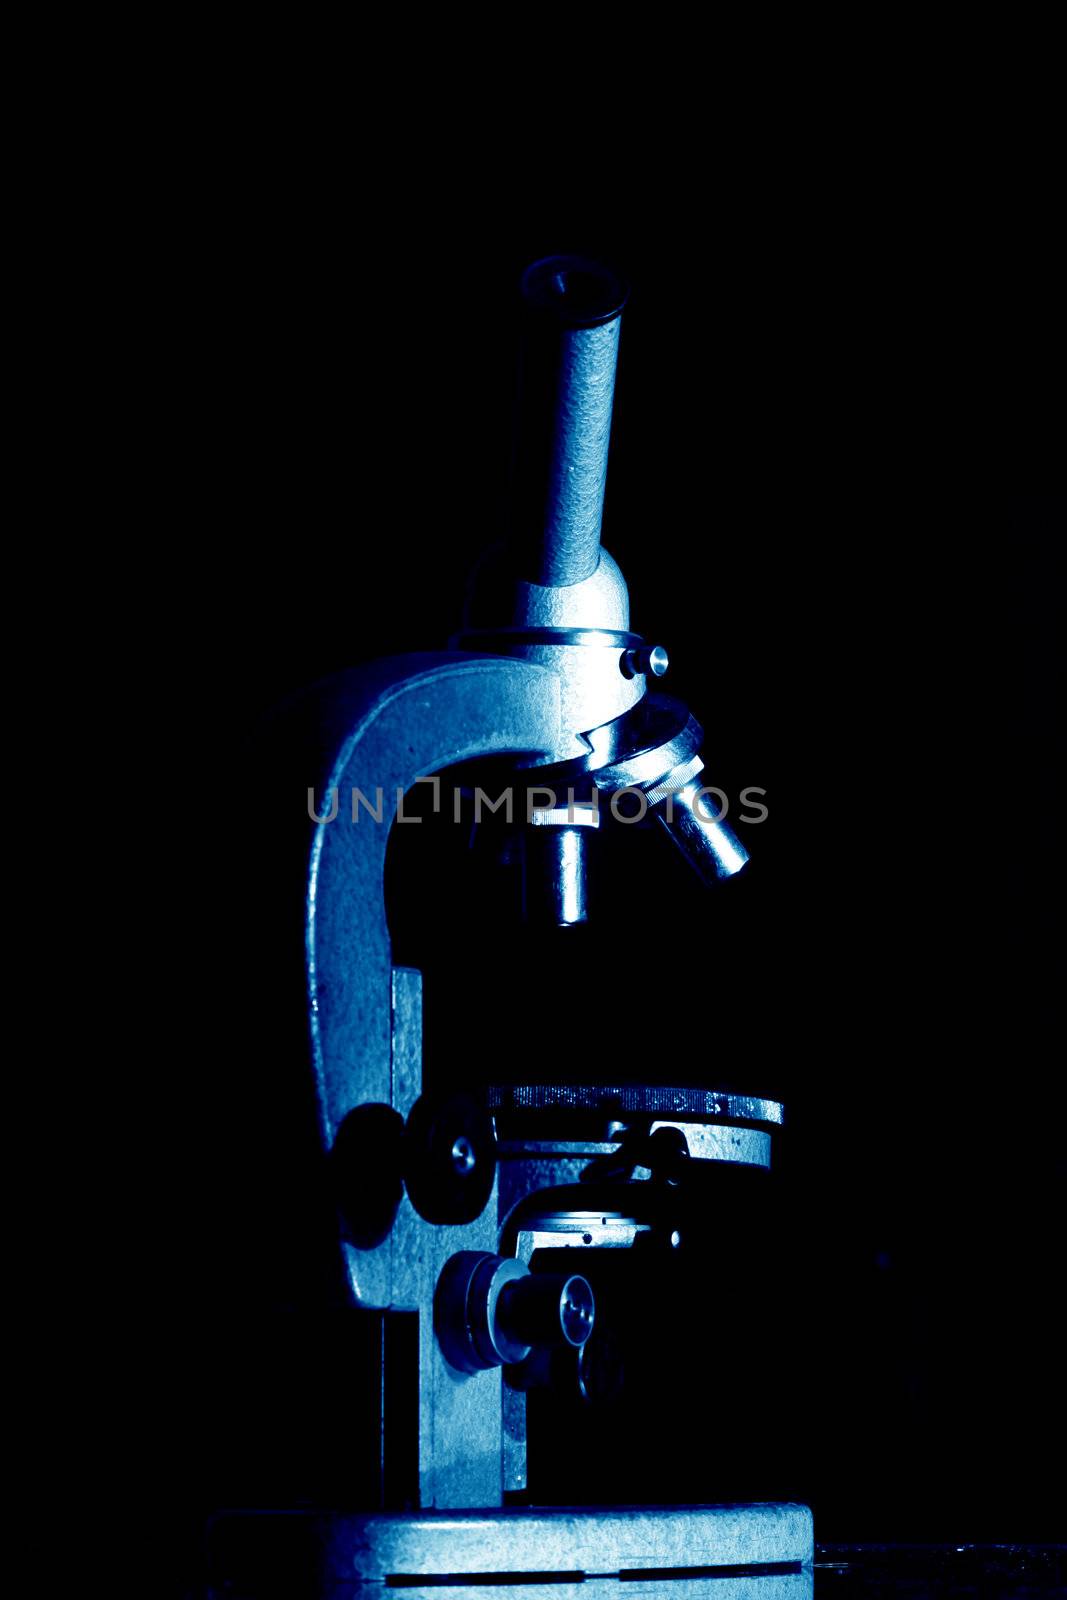 microscope close up science background